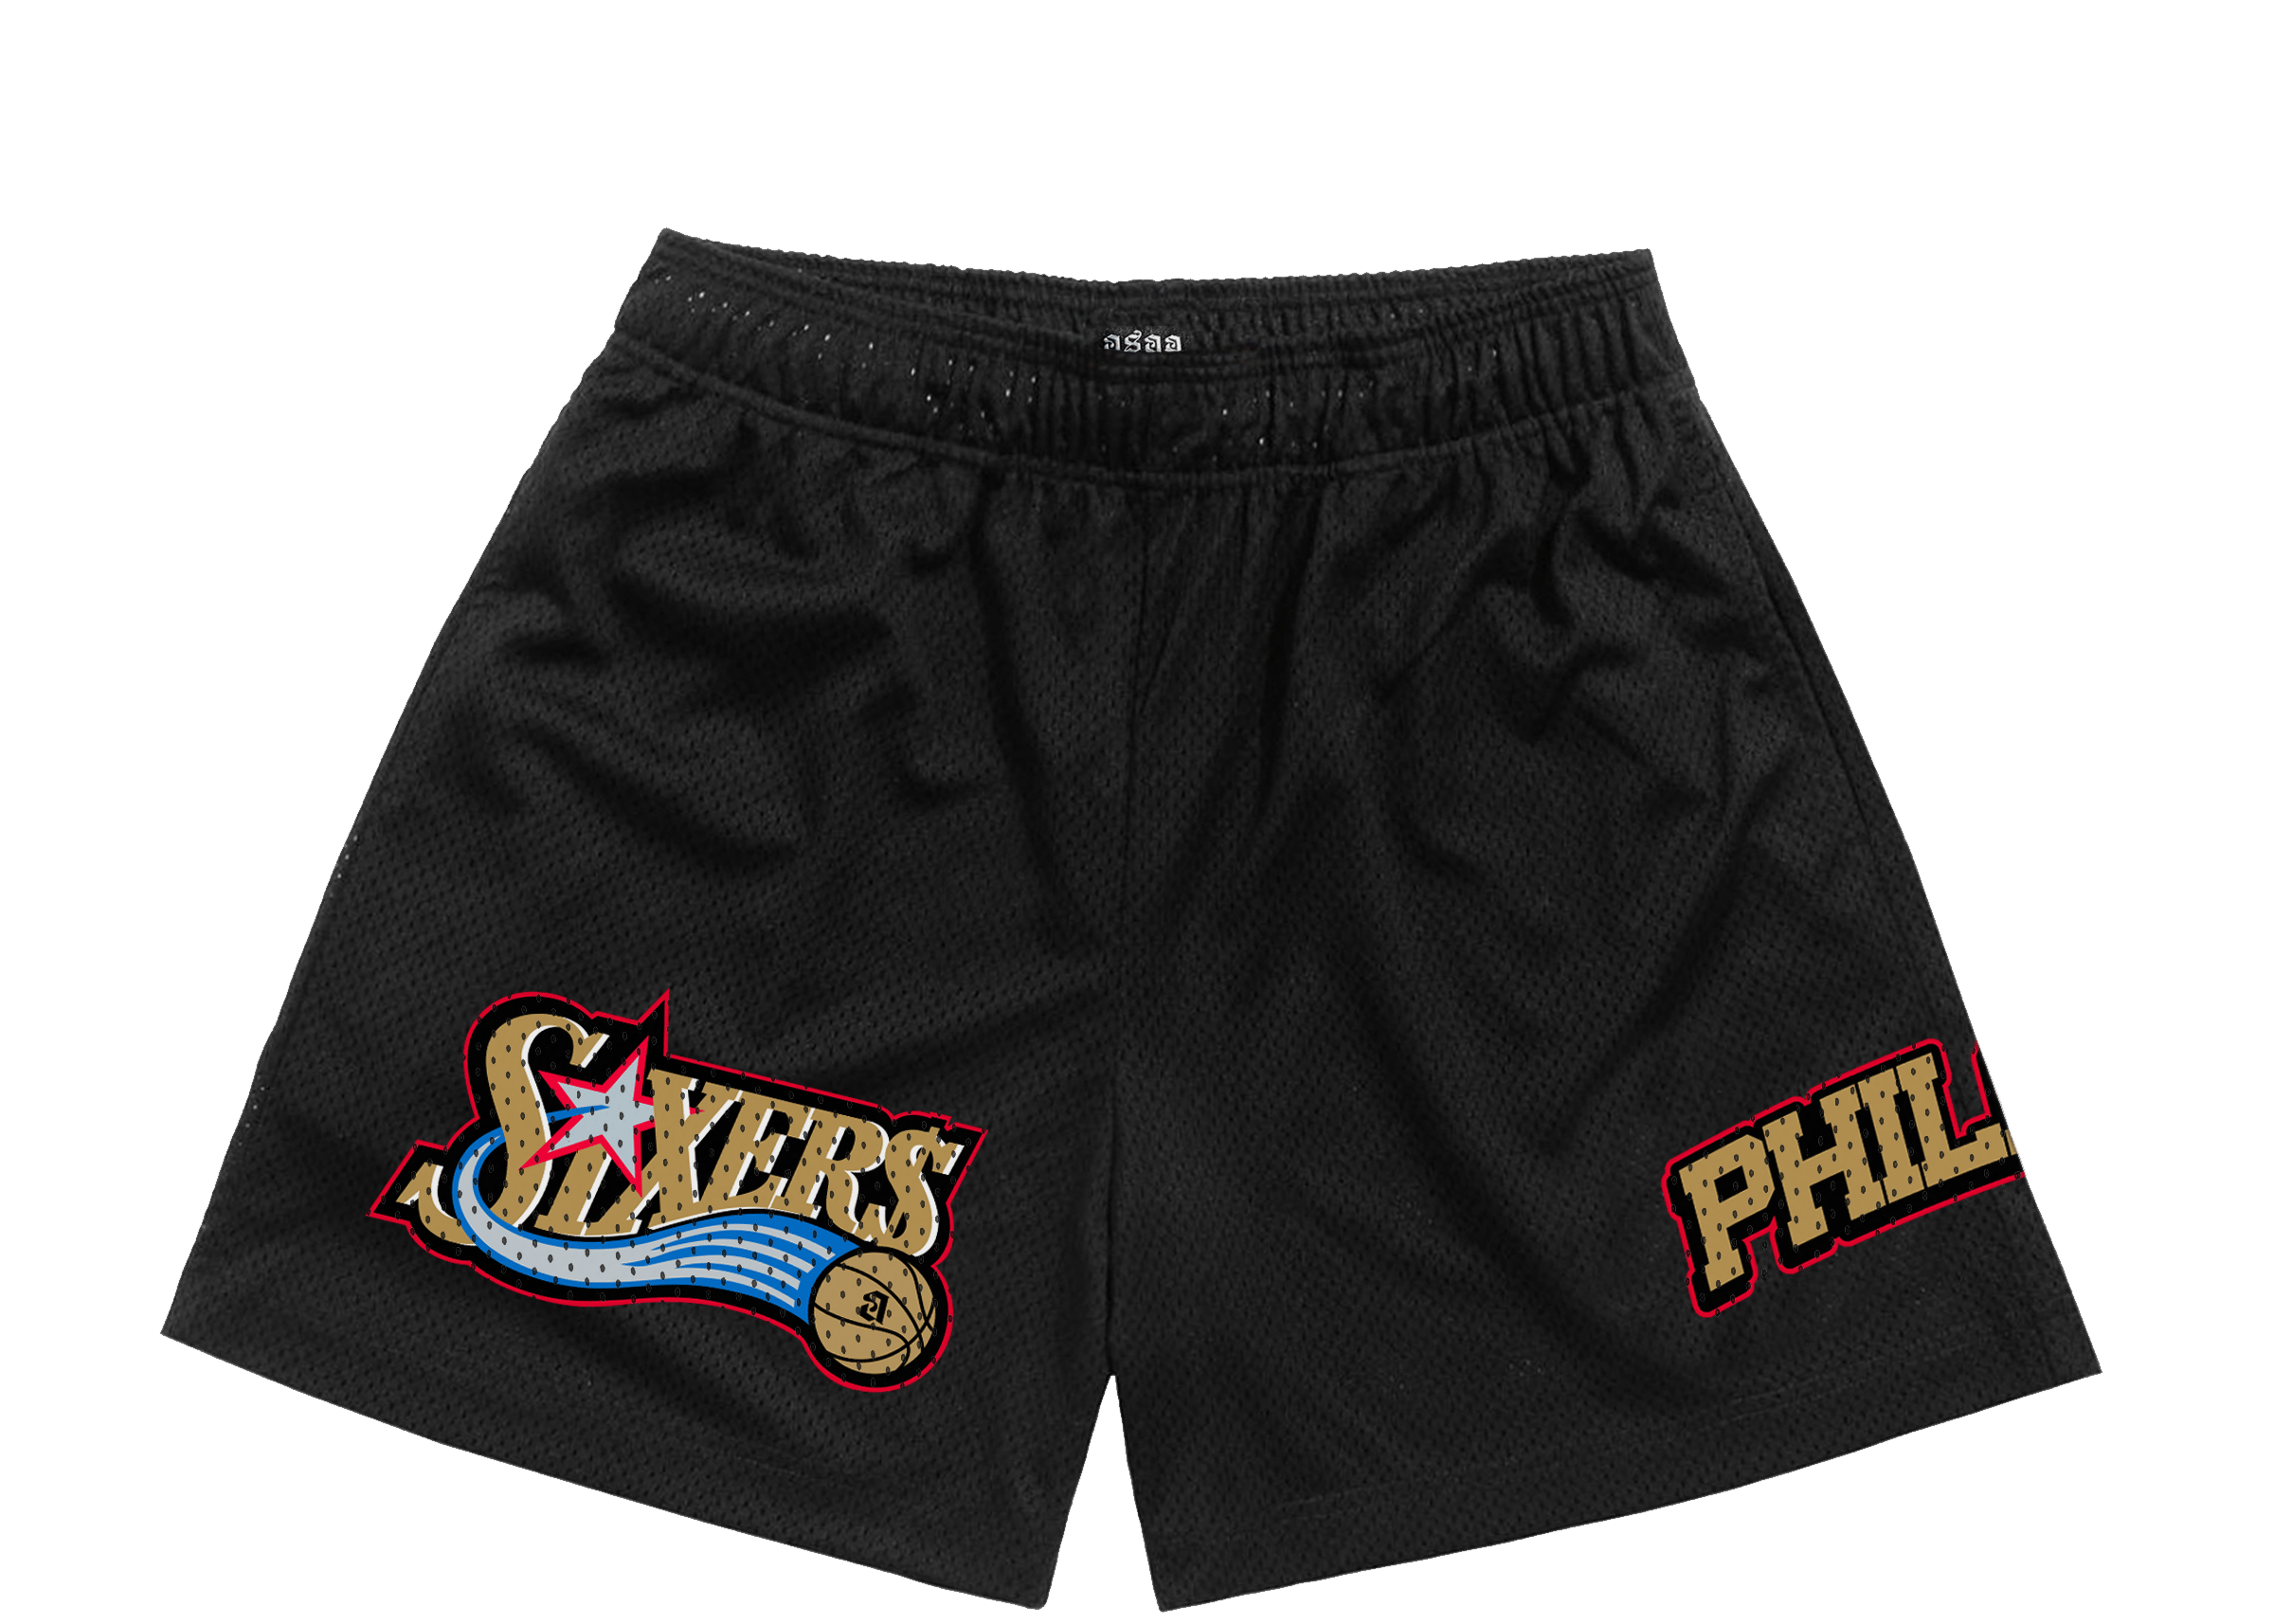 PHILLY SHORTS - asap culture